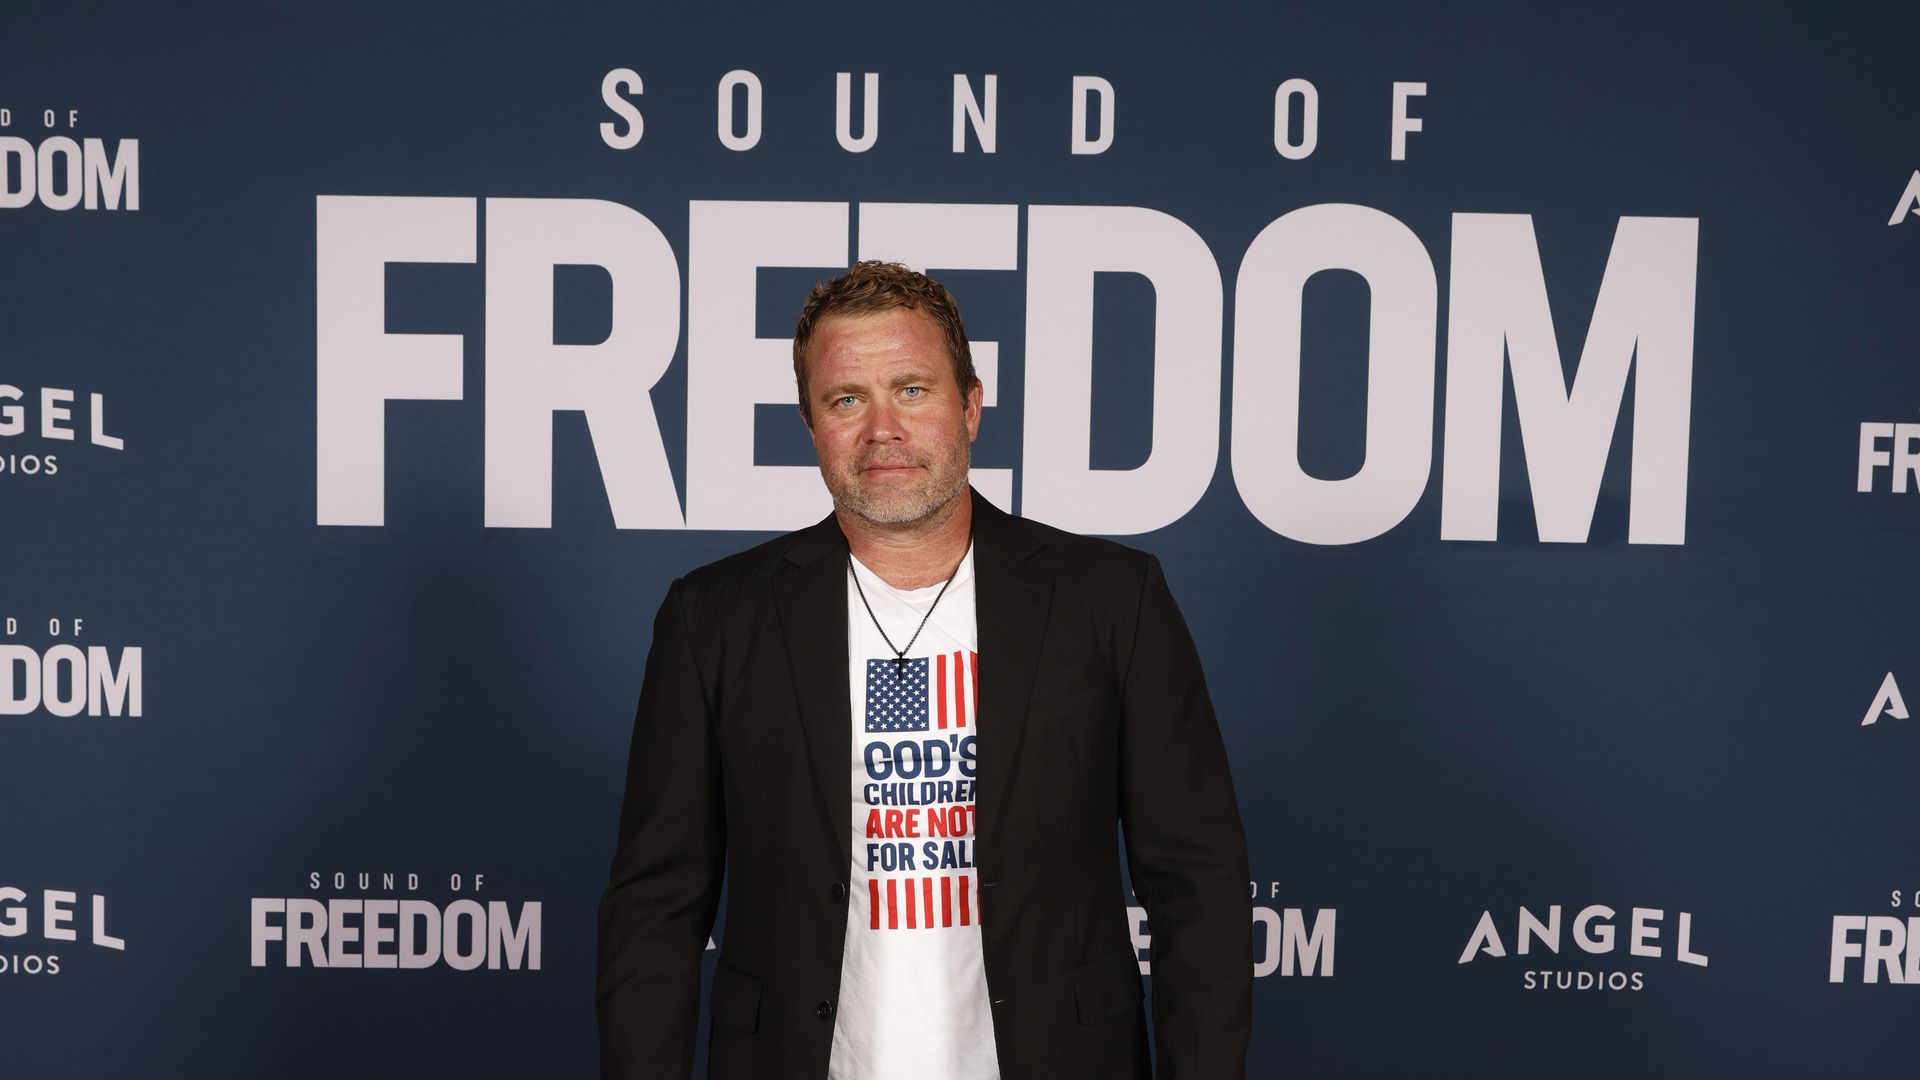 Tim Ballard stands in front of a screen that reads "Sound of Freedom."